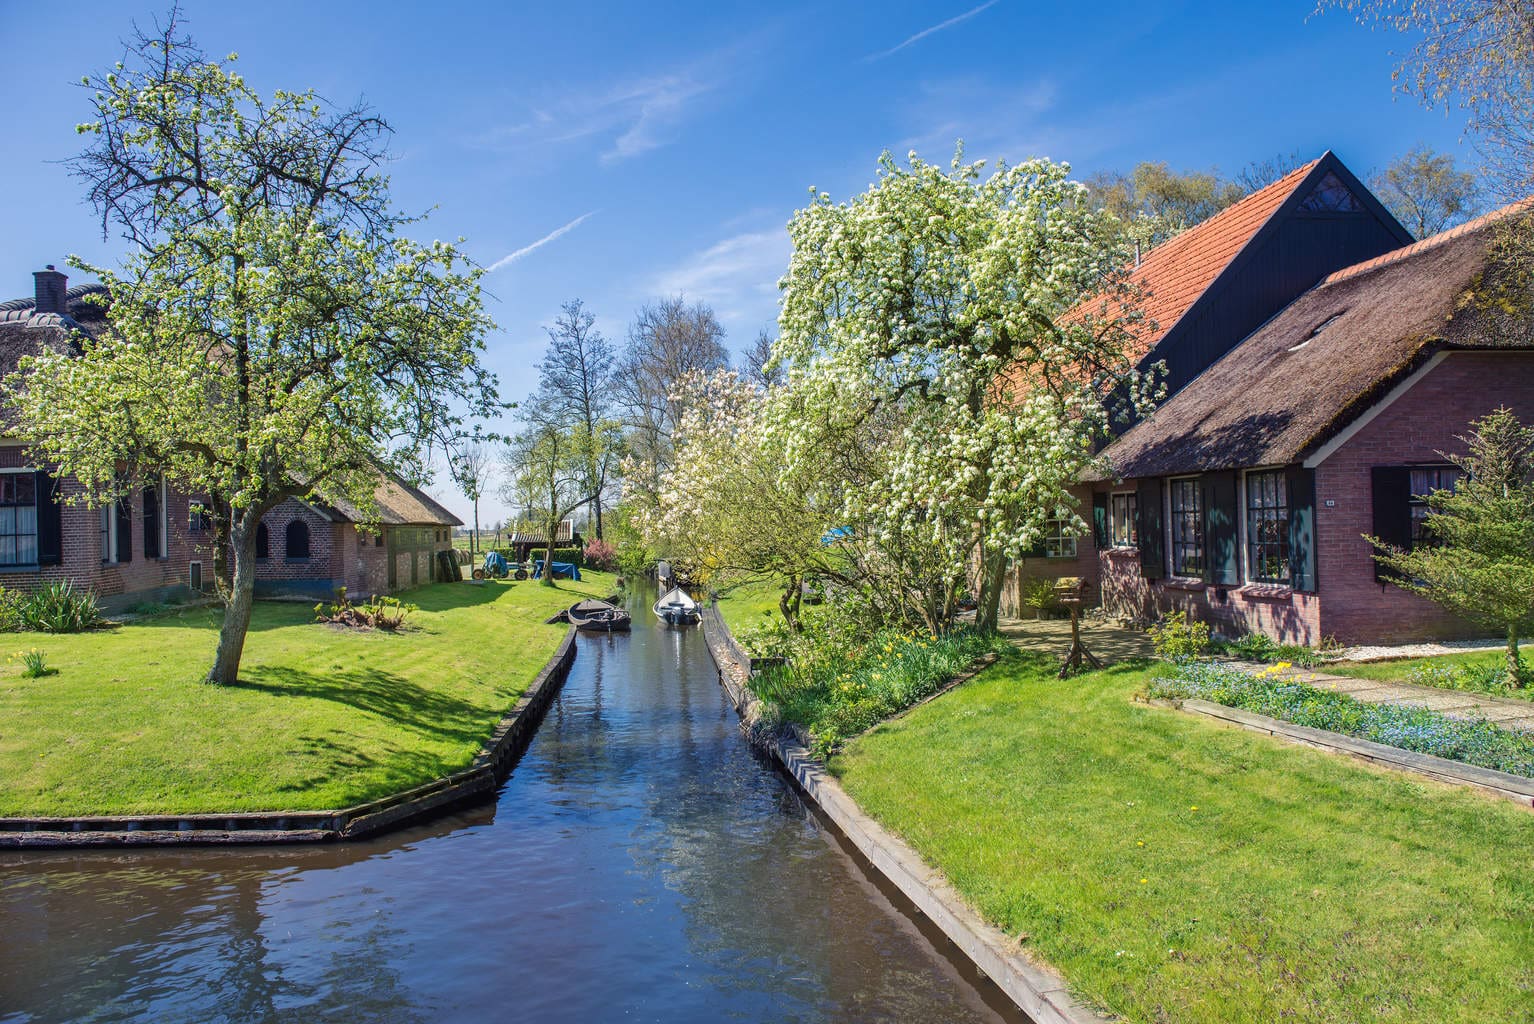 Spring in Giethoorn, a small village in Overijssel province in t